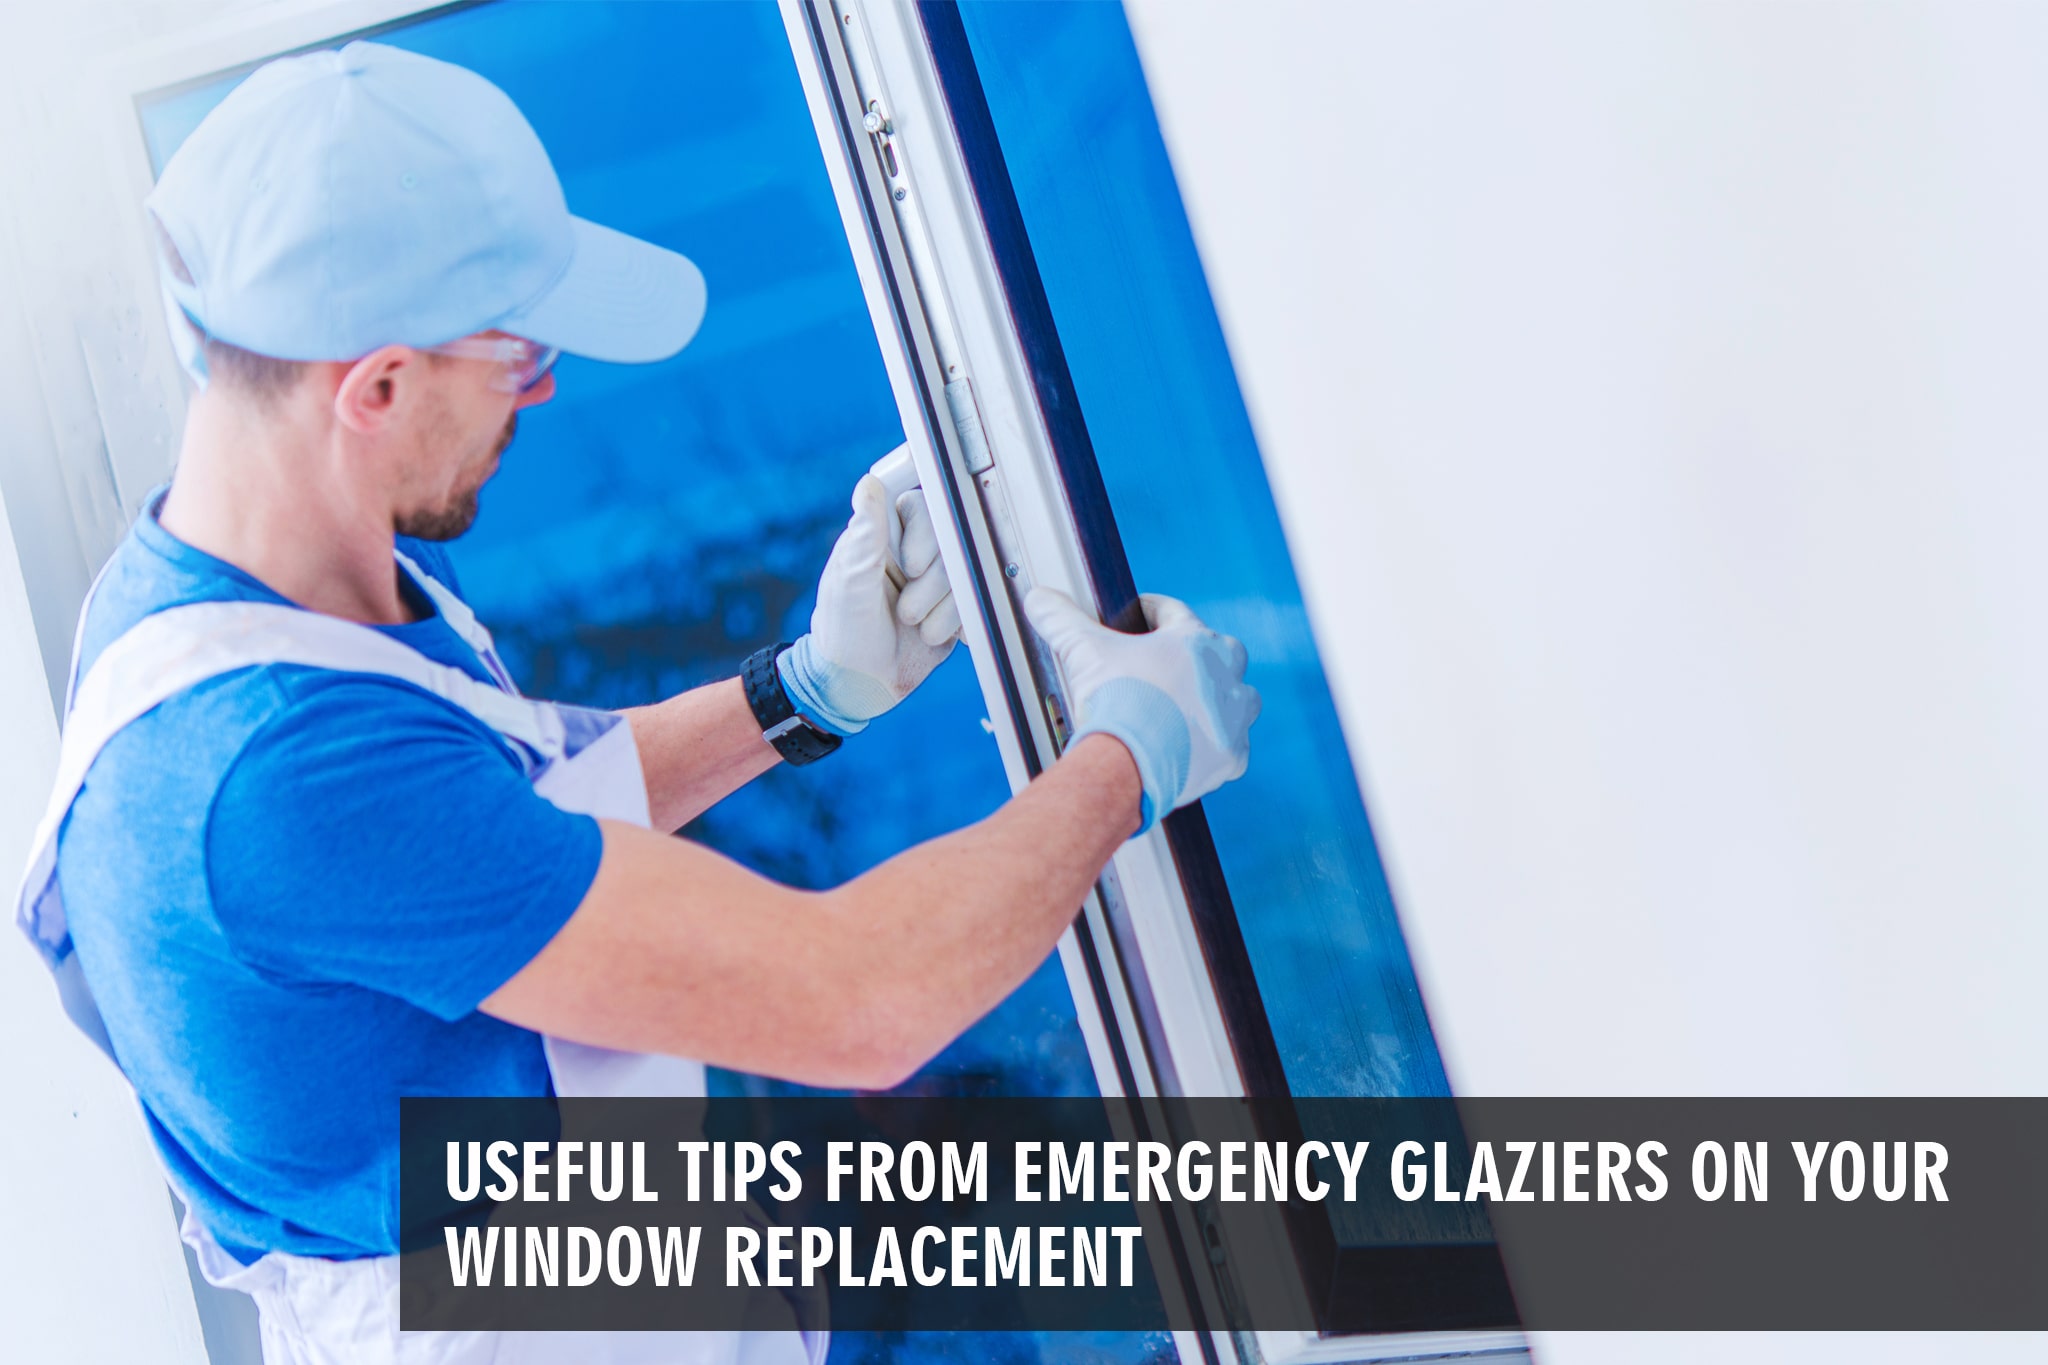 Useful Tips from Emergency Glaziers on Your Window Replacement By Glaziers London